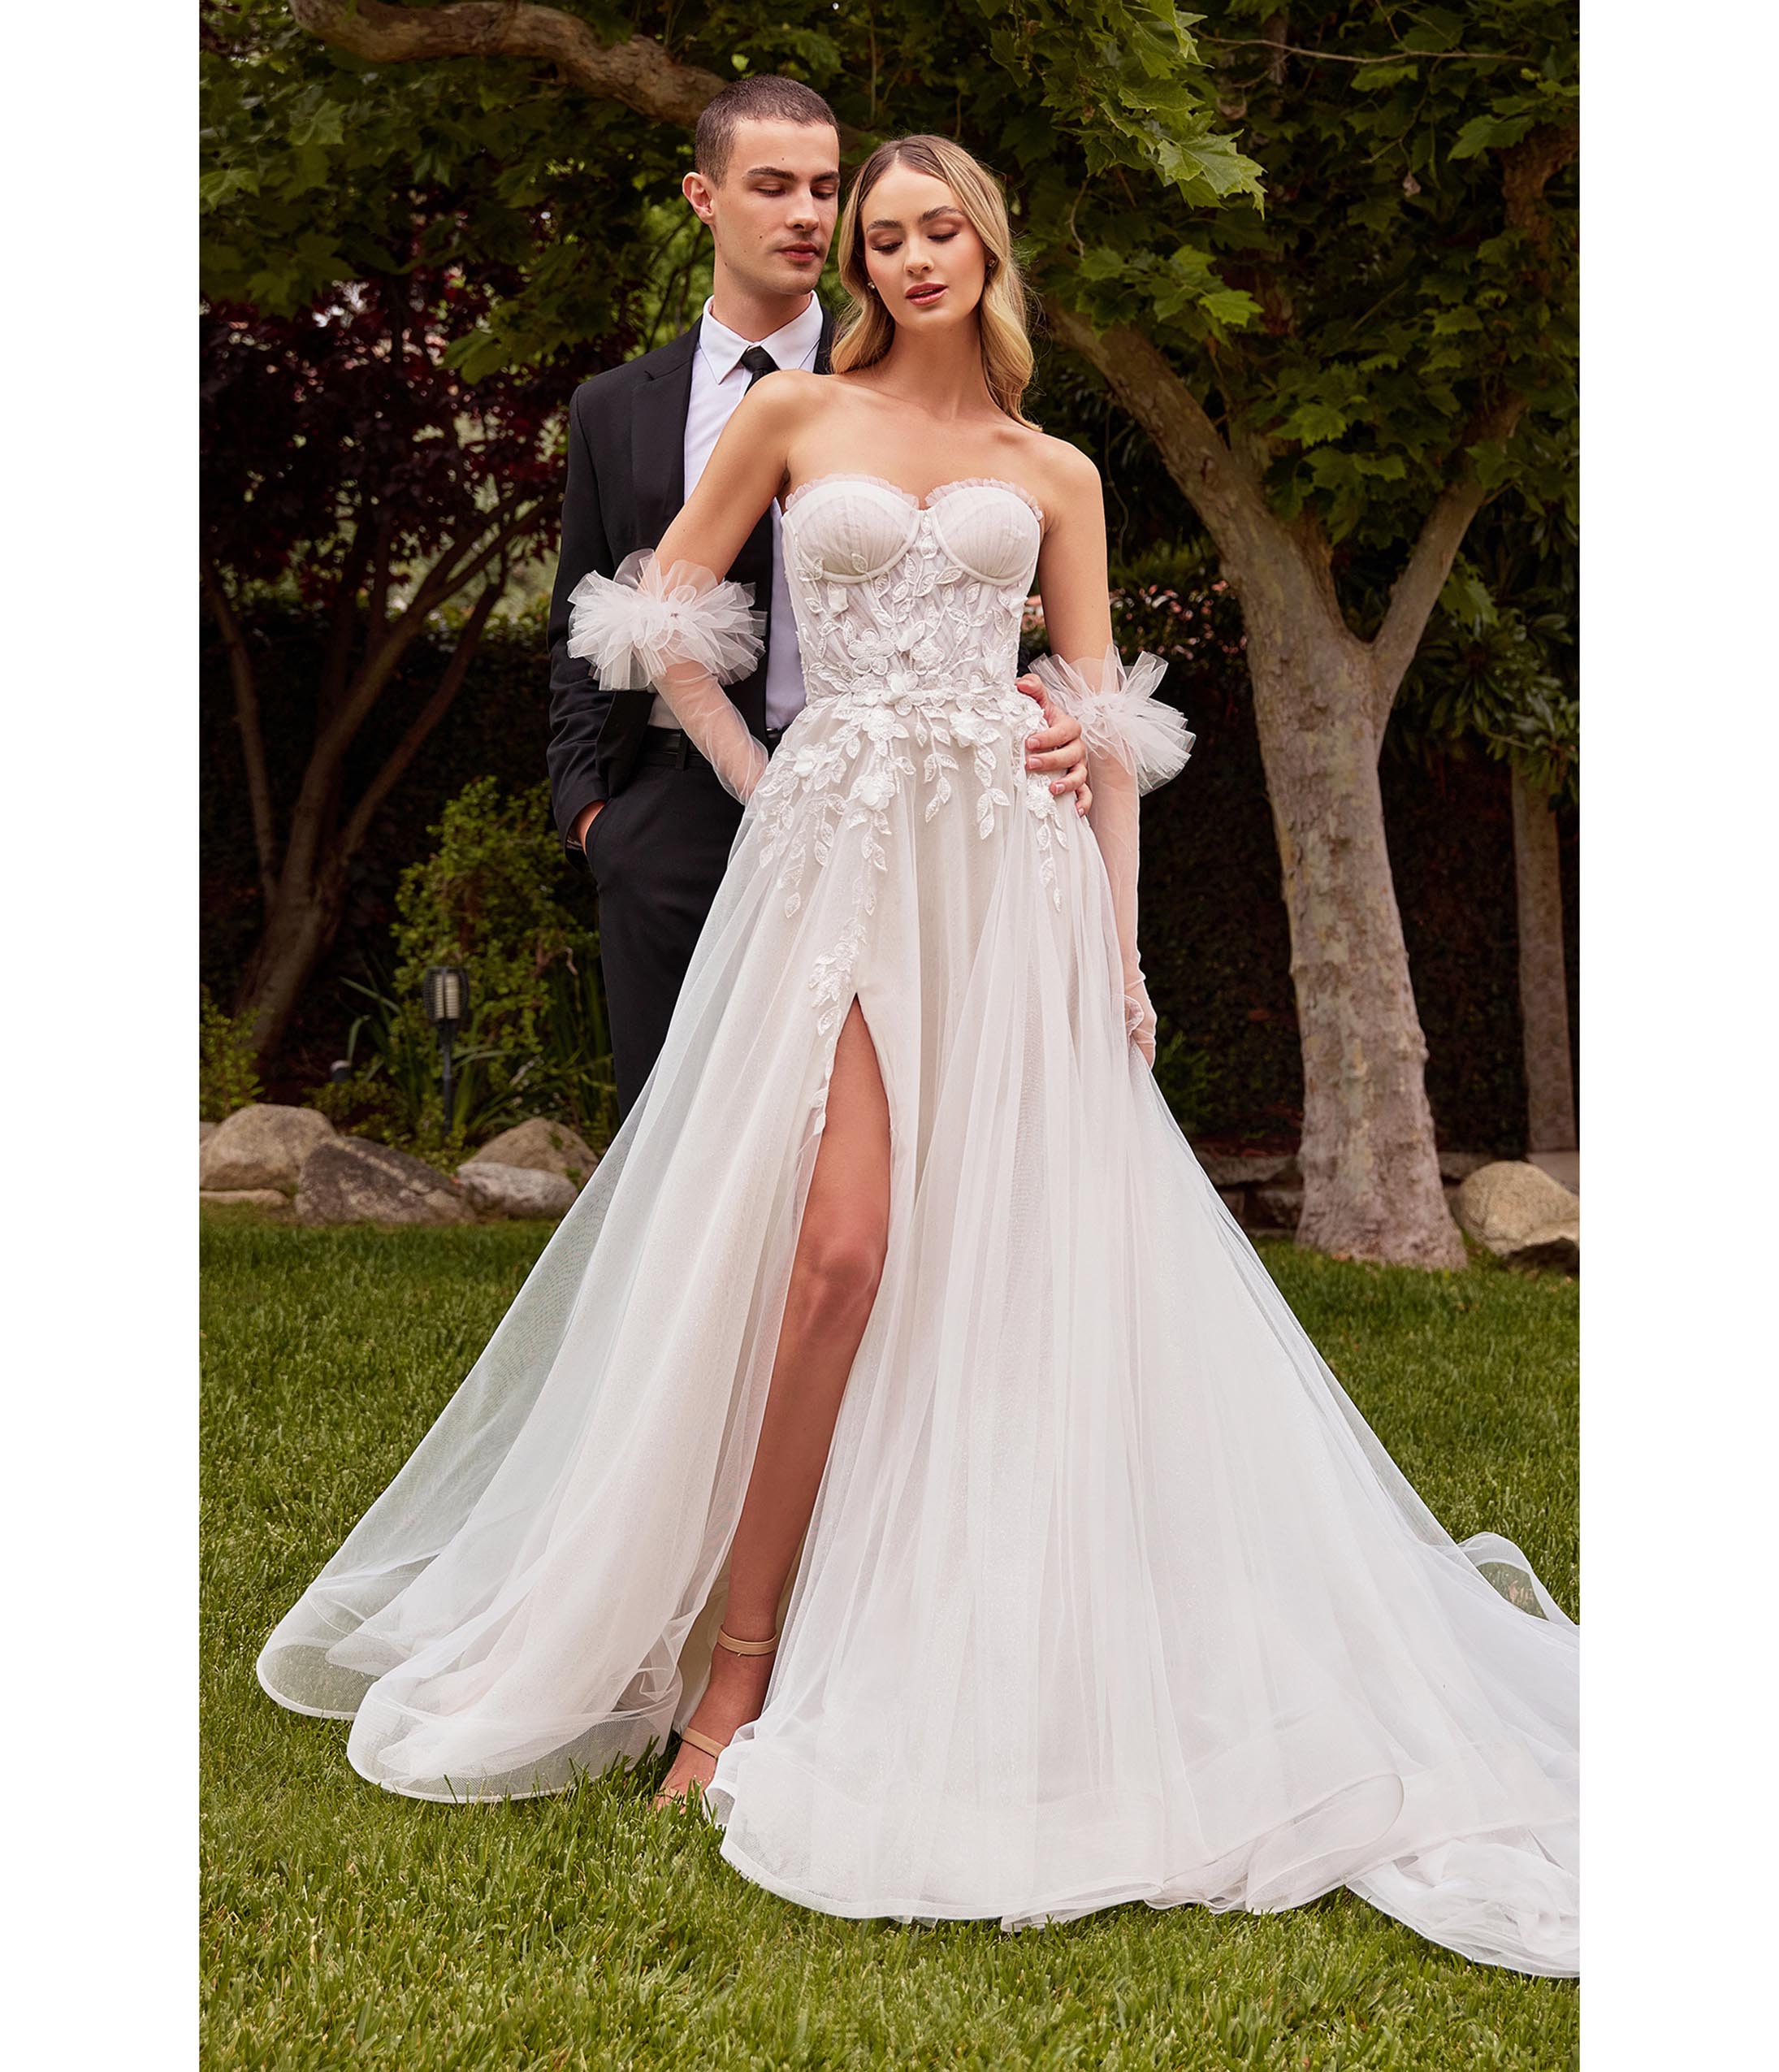 Five wedding dresses for women you'll admire! - Esposa Group